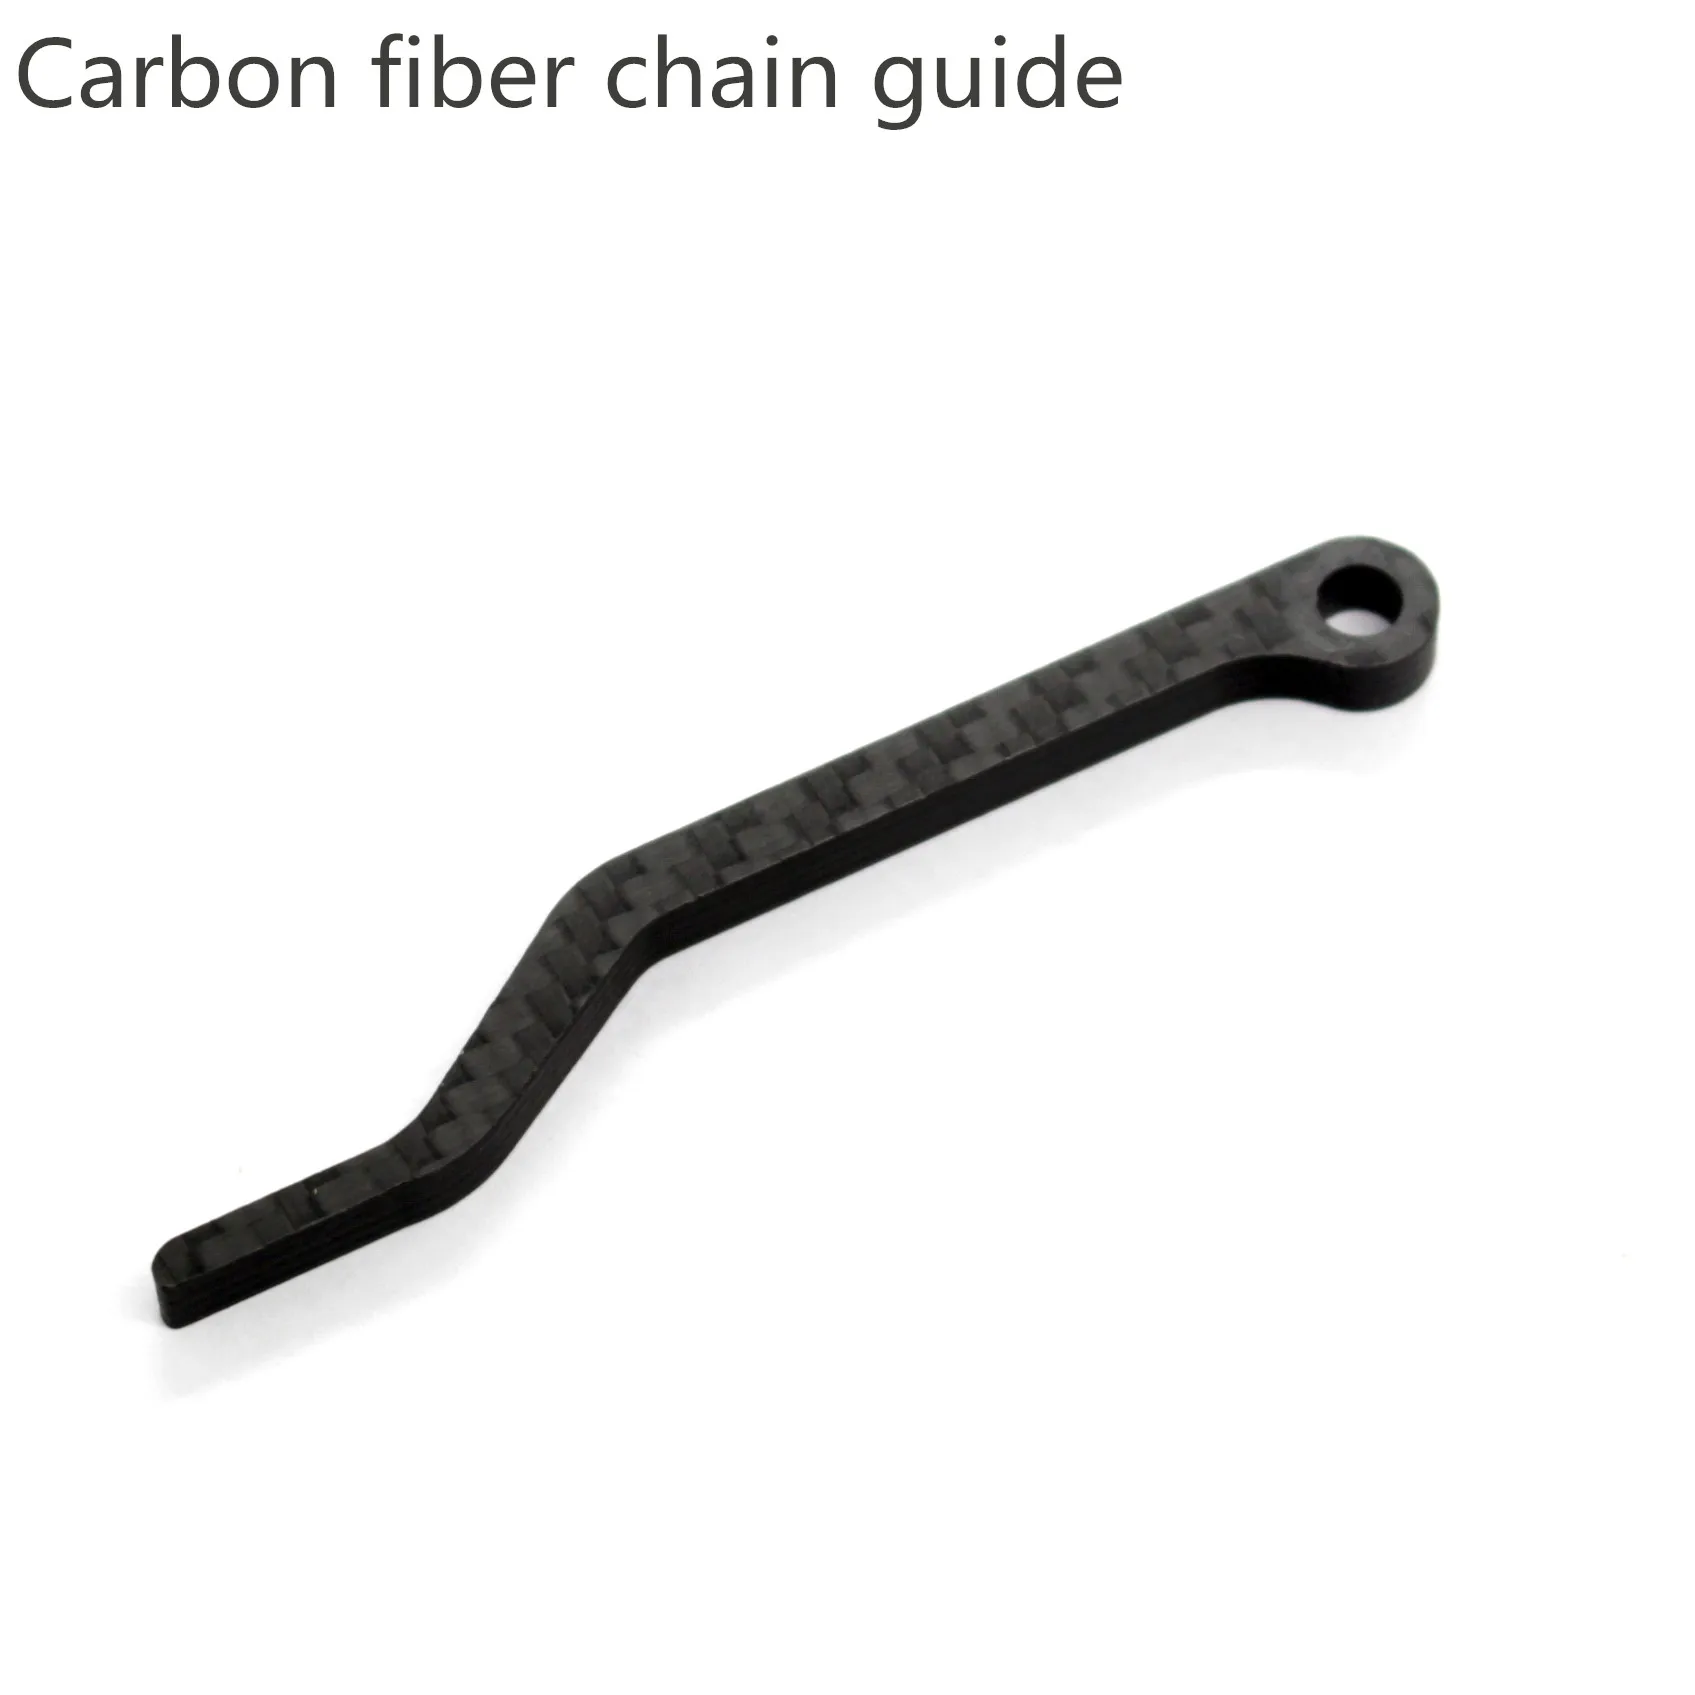 Carbon Fiber Road Bike Bicycle Chain Guide Stabilizer Anti Drop Tool 93mm 4g 